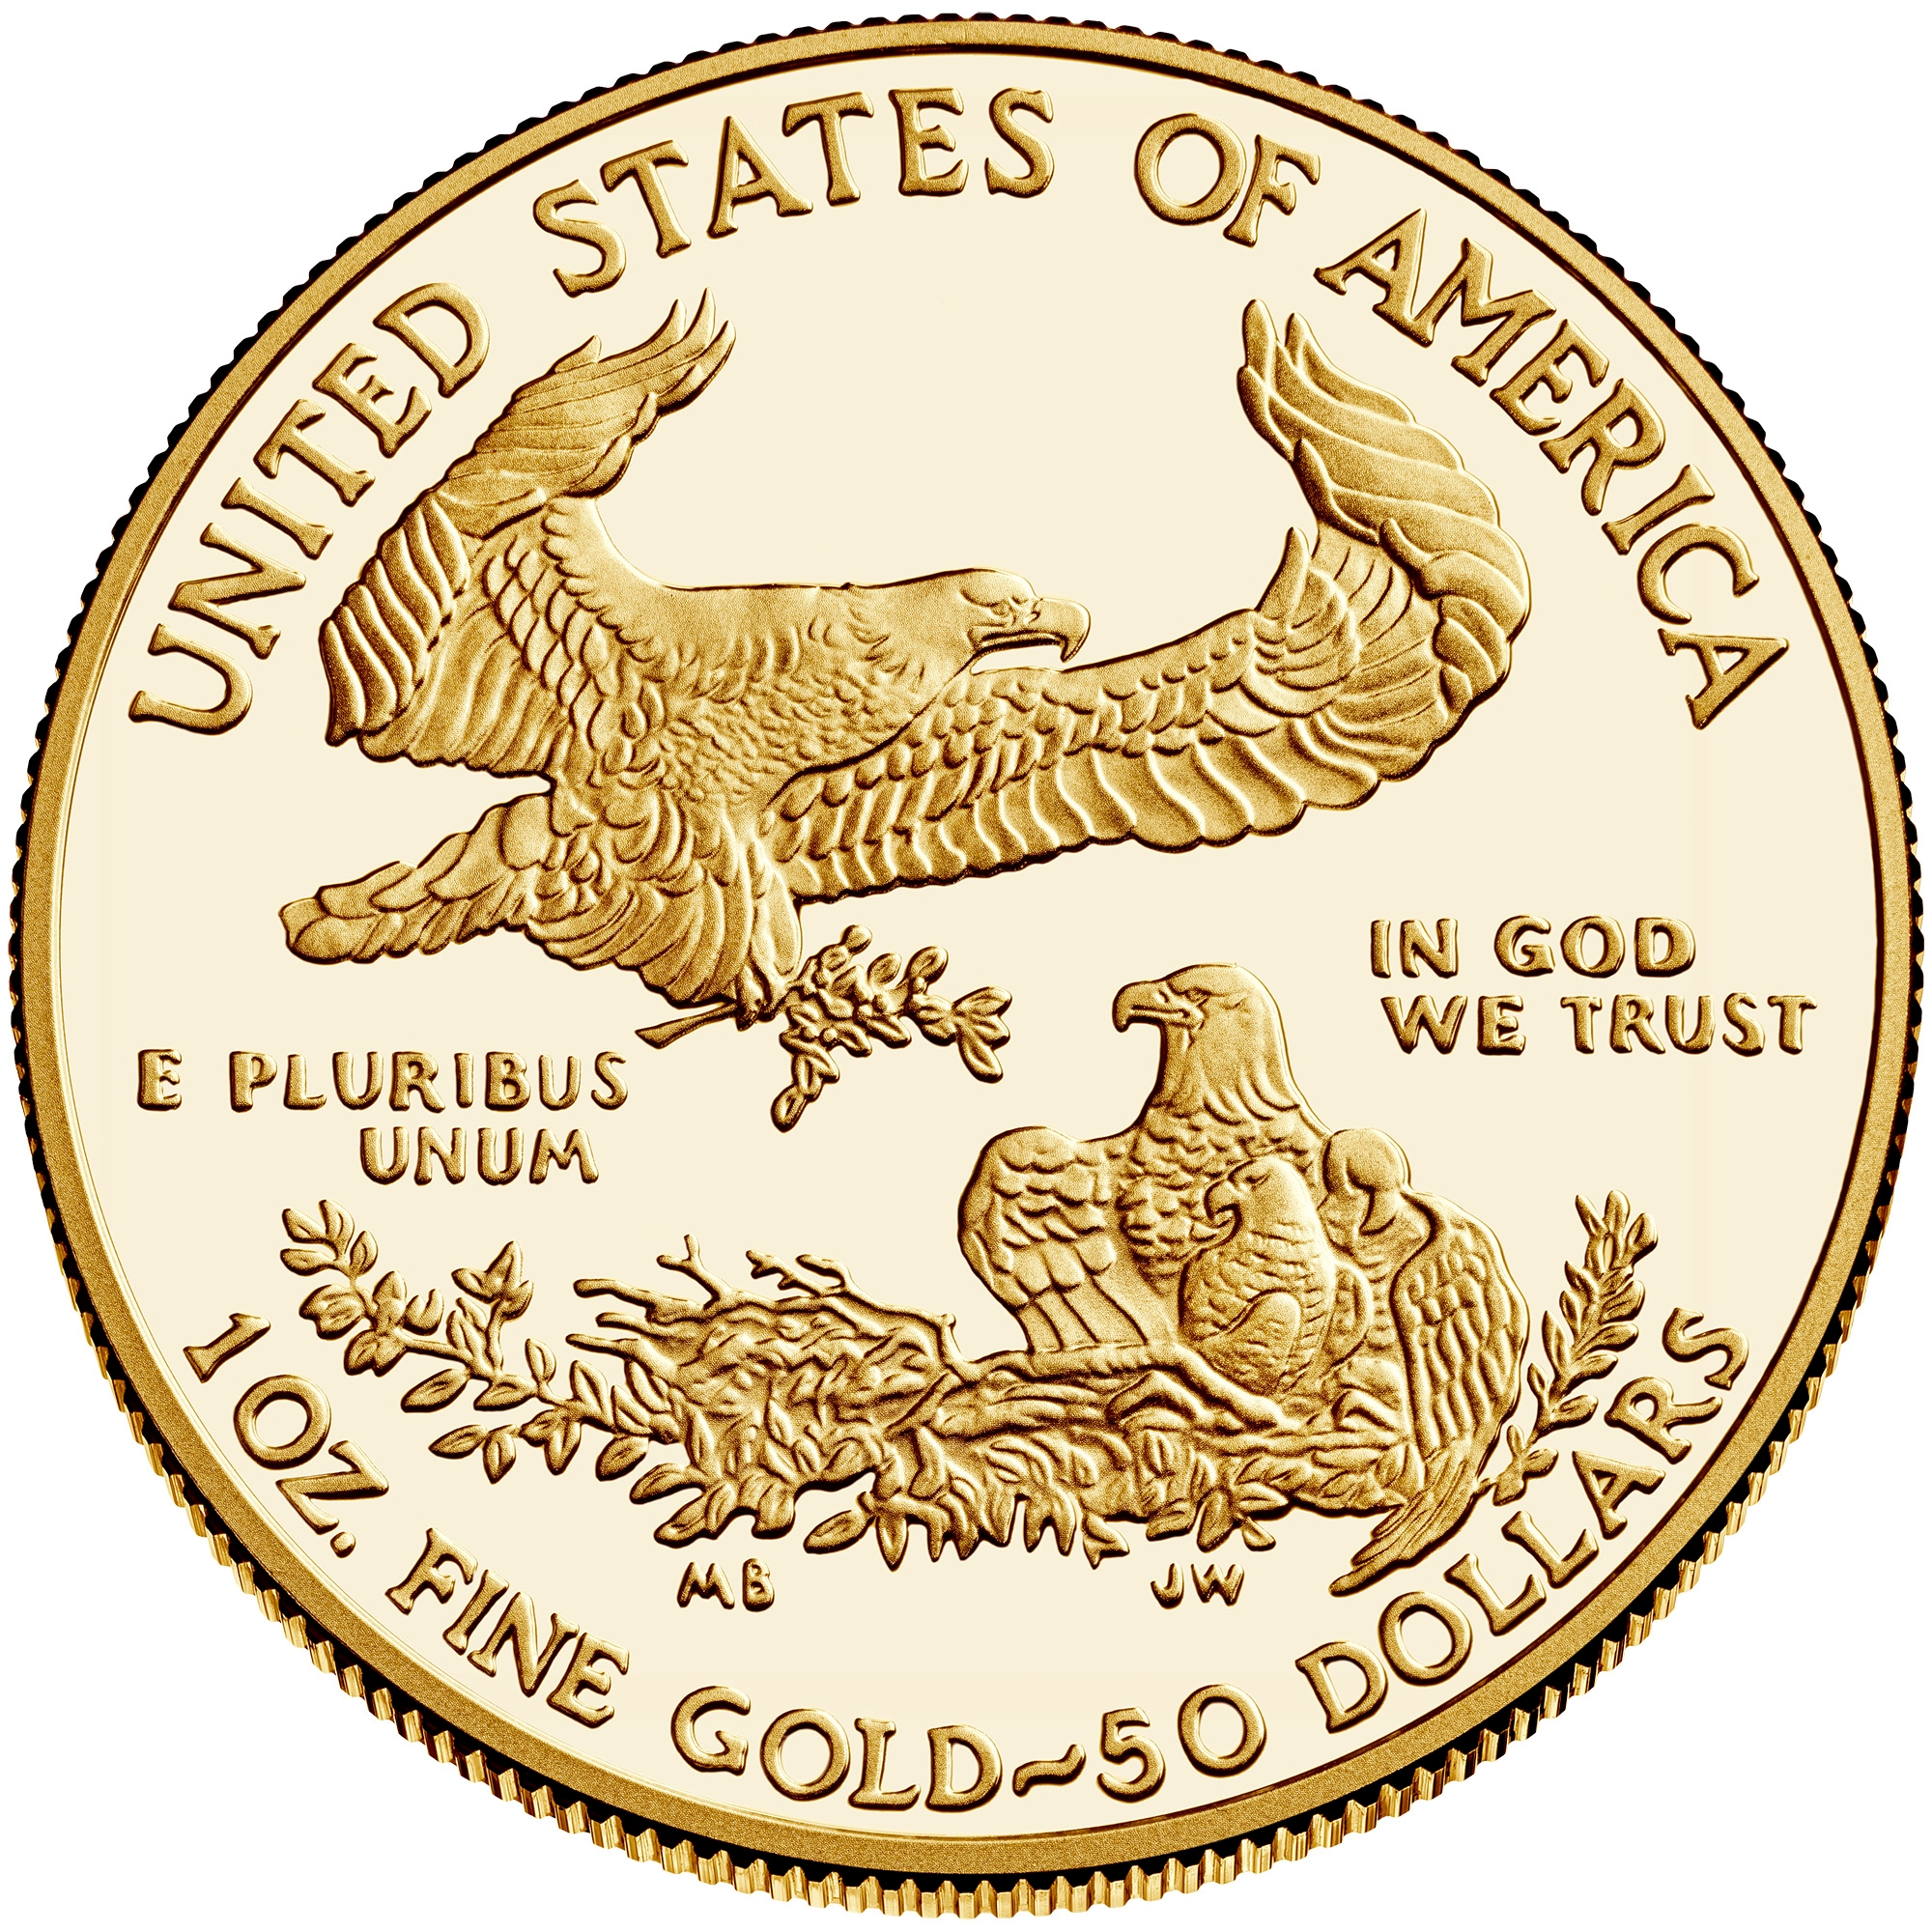 2020-end-of-wwii-privy-mark-gold-silver-american-eagle-proof-coins